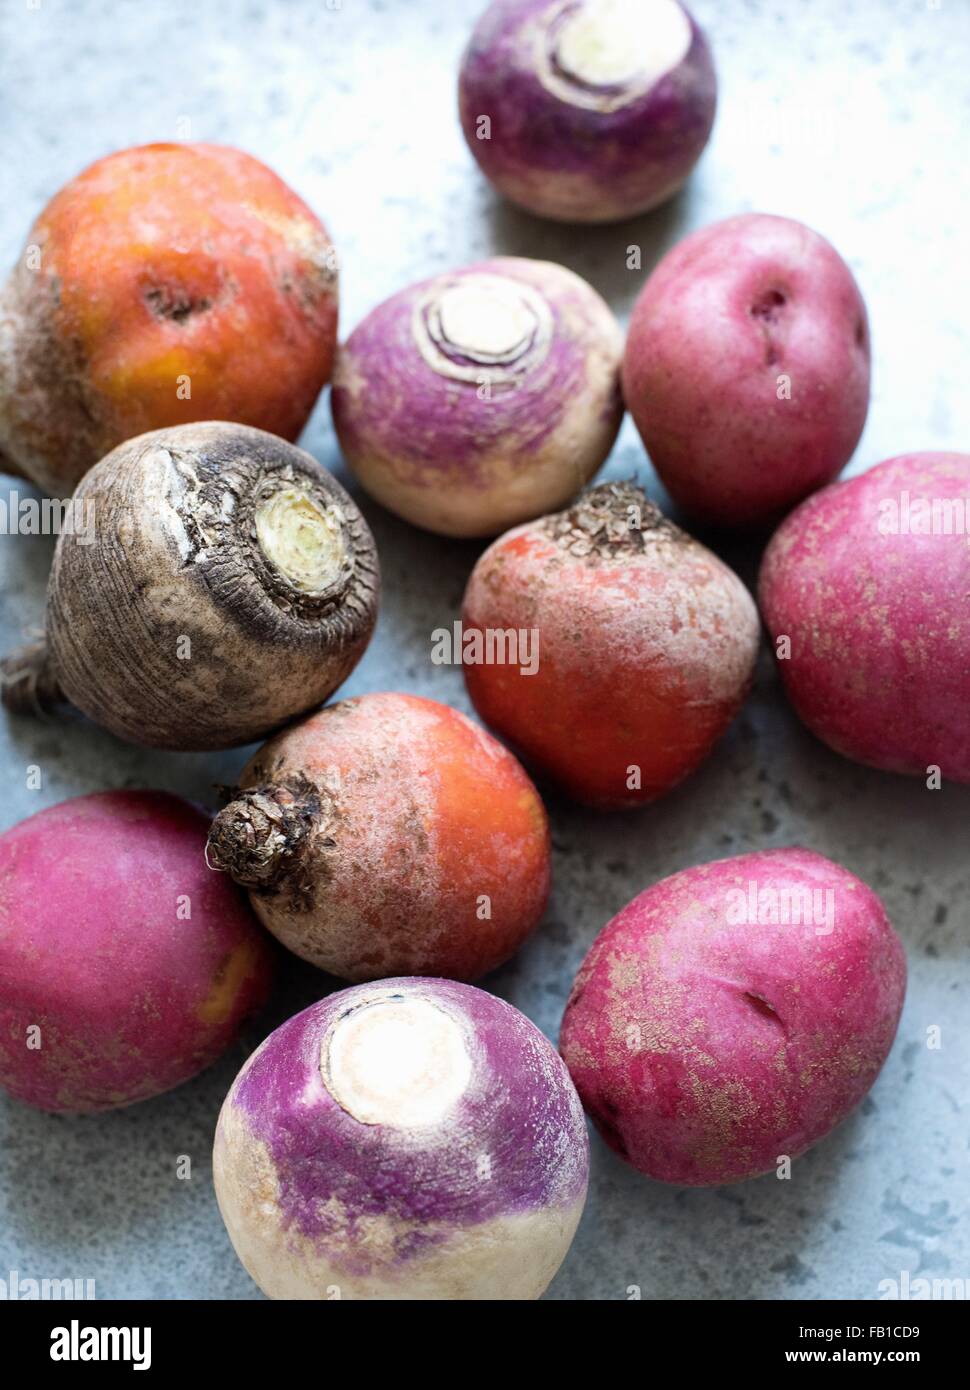 Overhead view of Autumn root vegetables Stock Photo